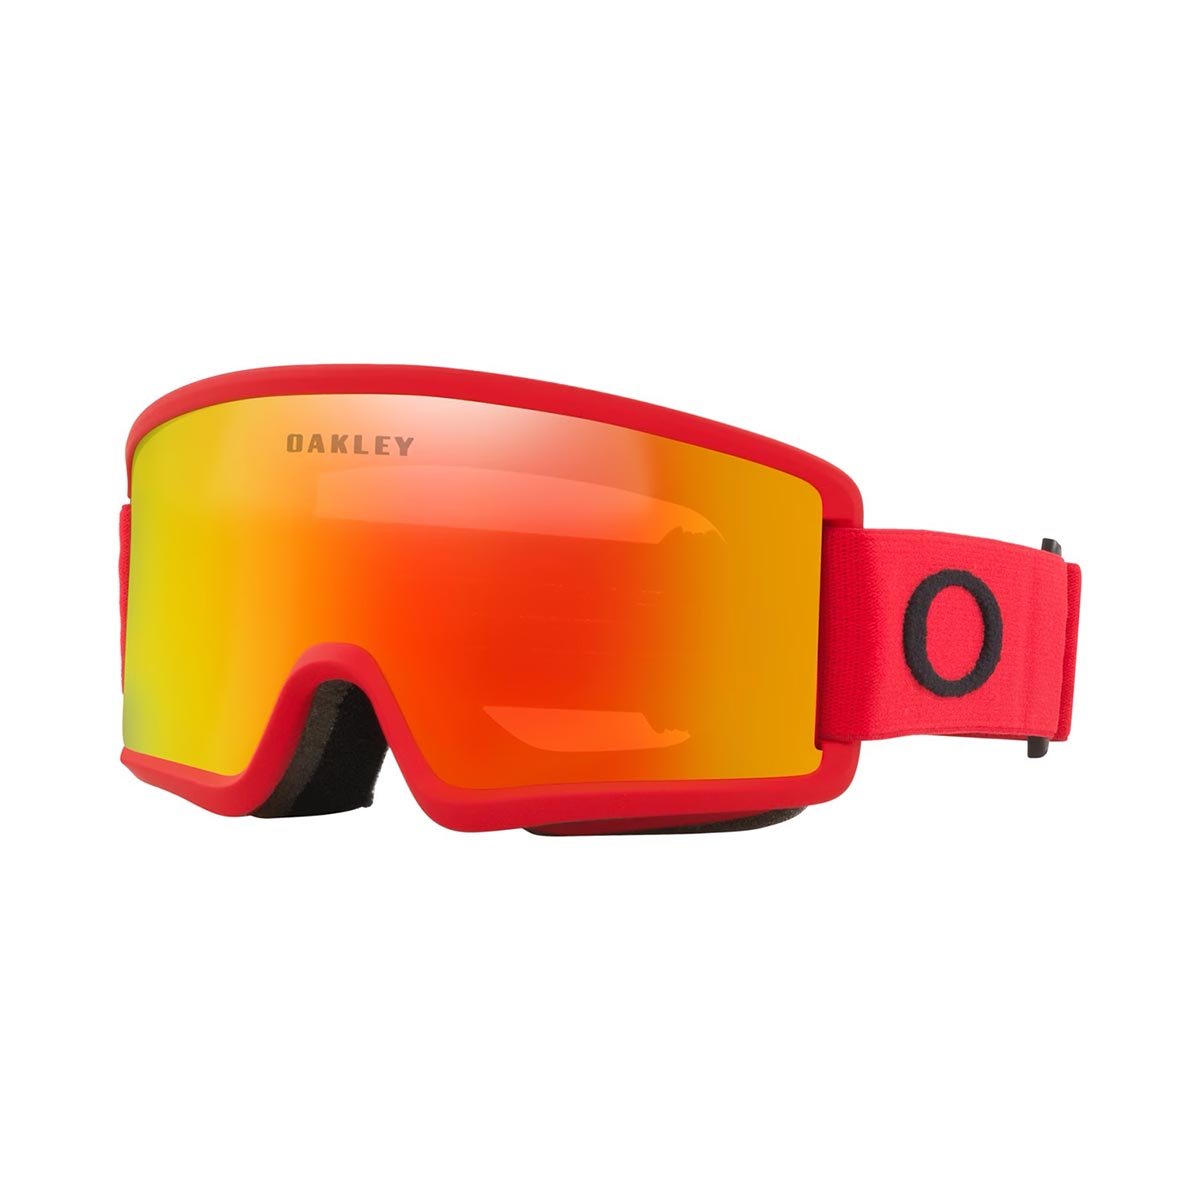 OAKLEY - TARGET LINE S SNOW GOGGLES